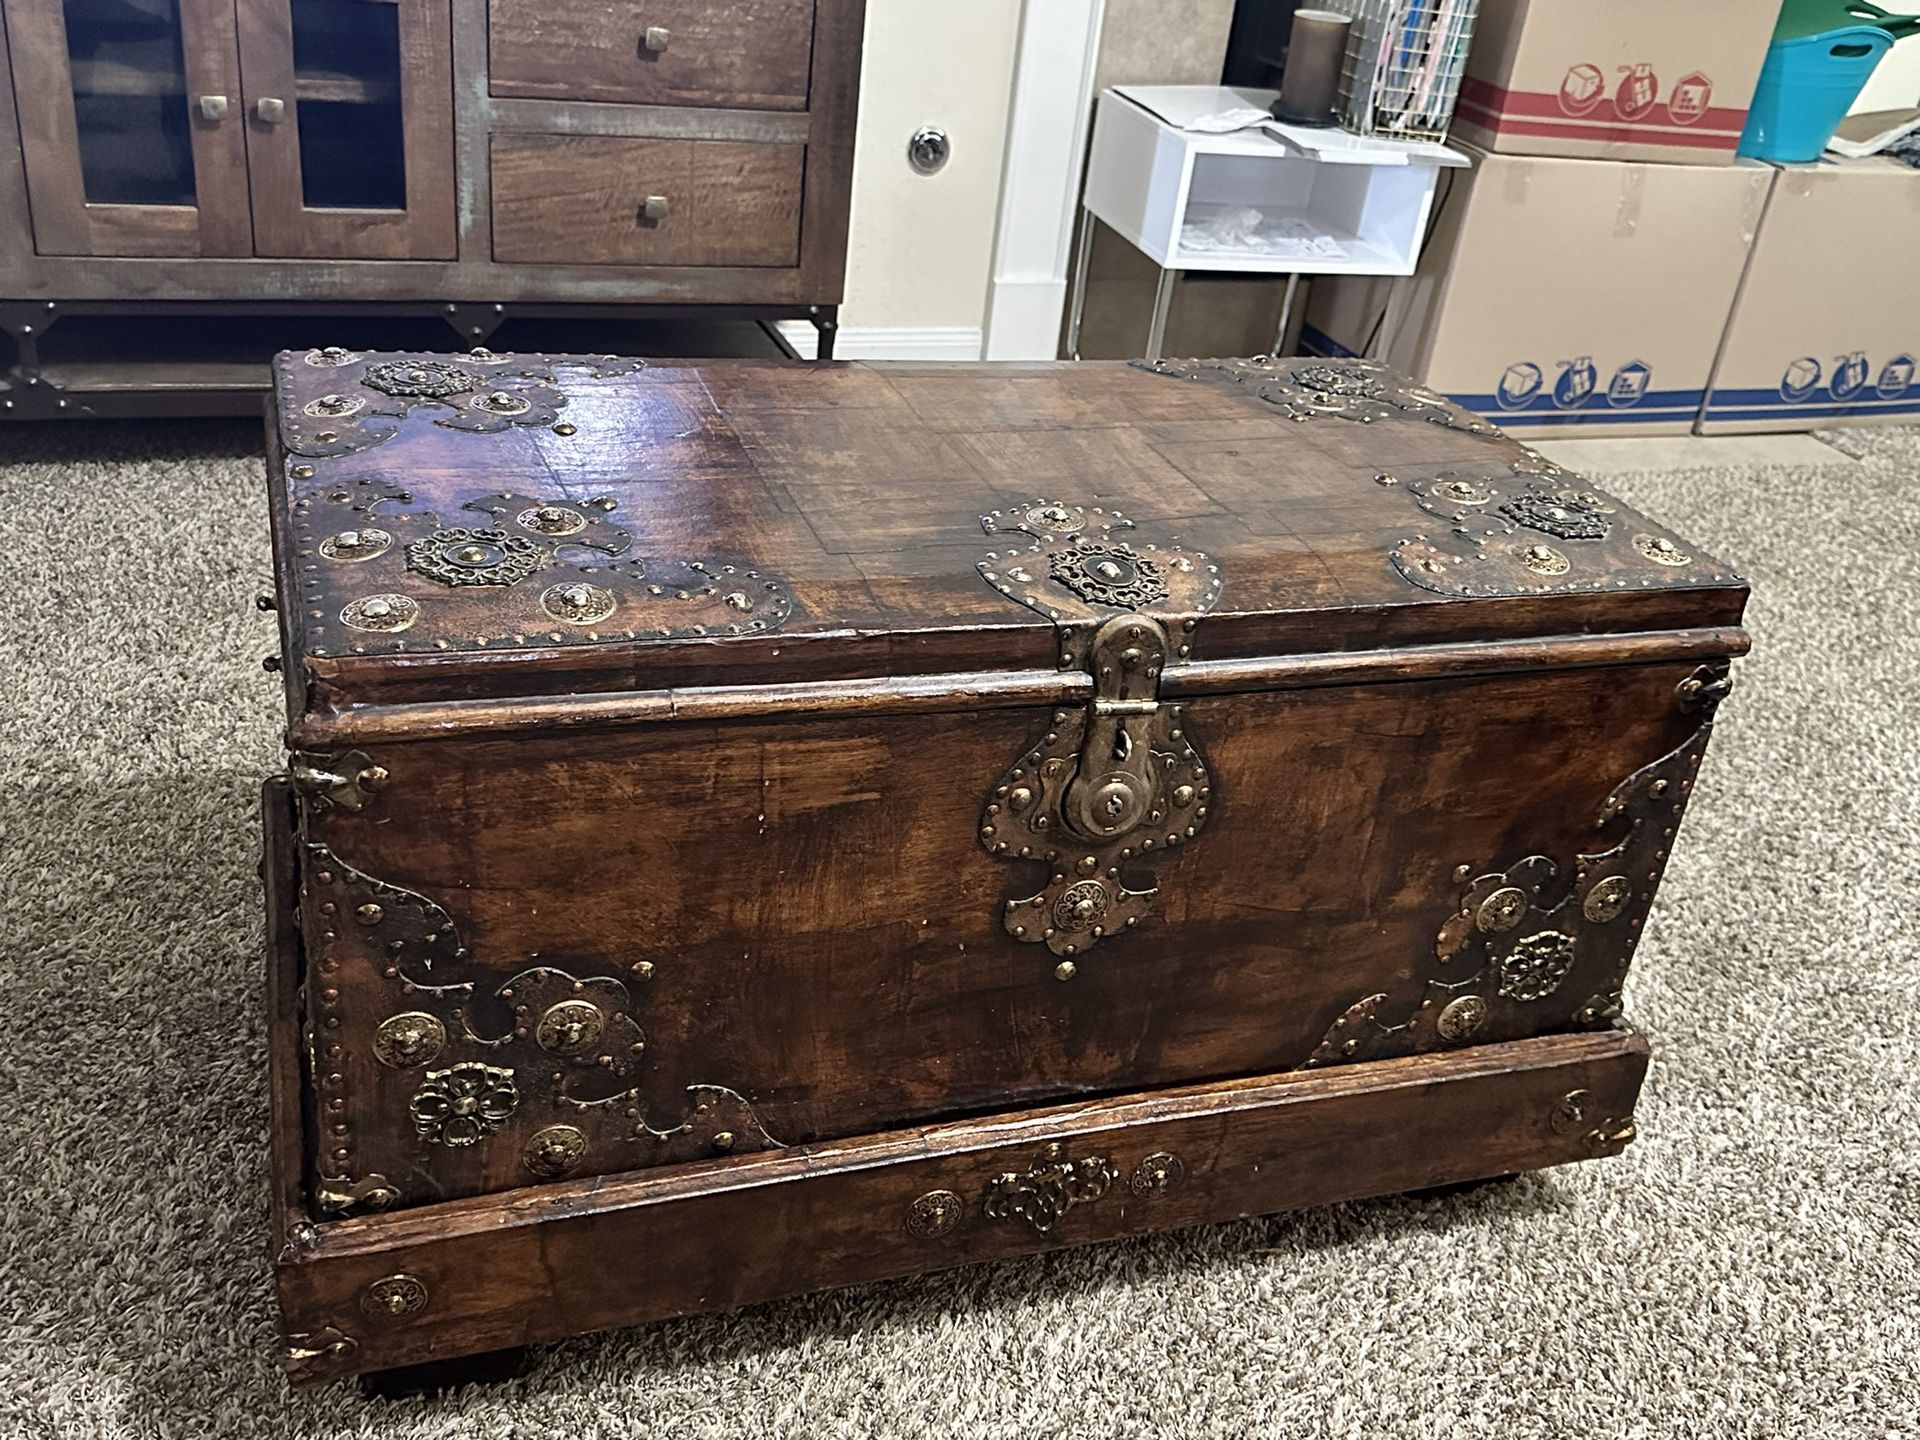 Antique Handmade Chest with Separate Base with Iron Strappings & Embellishments